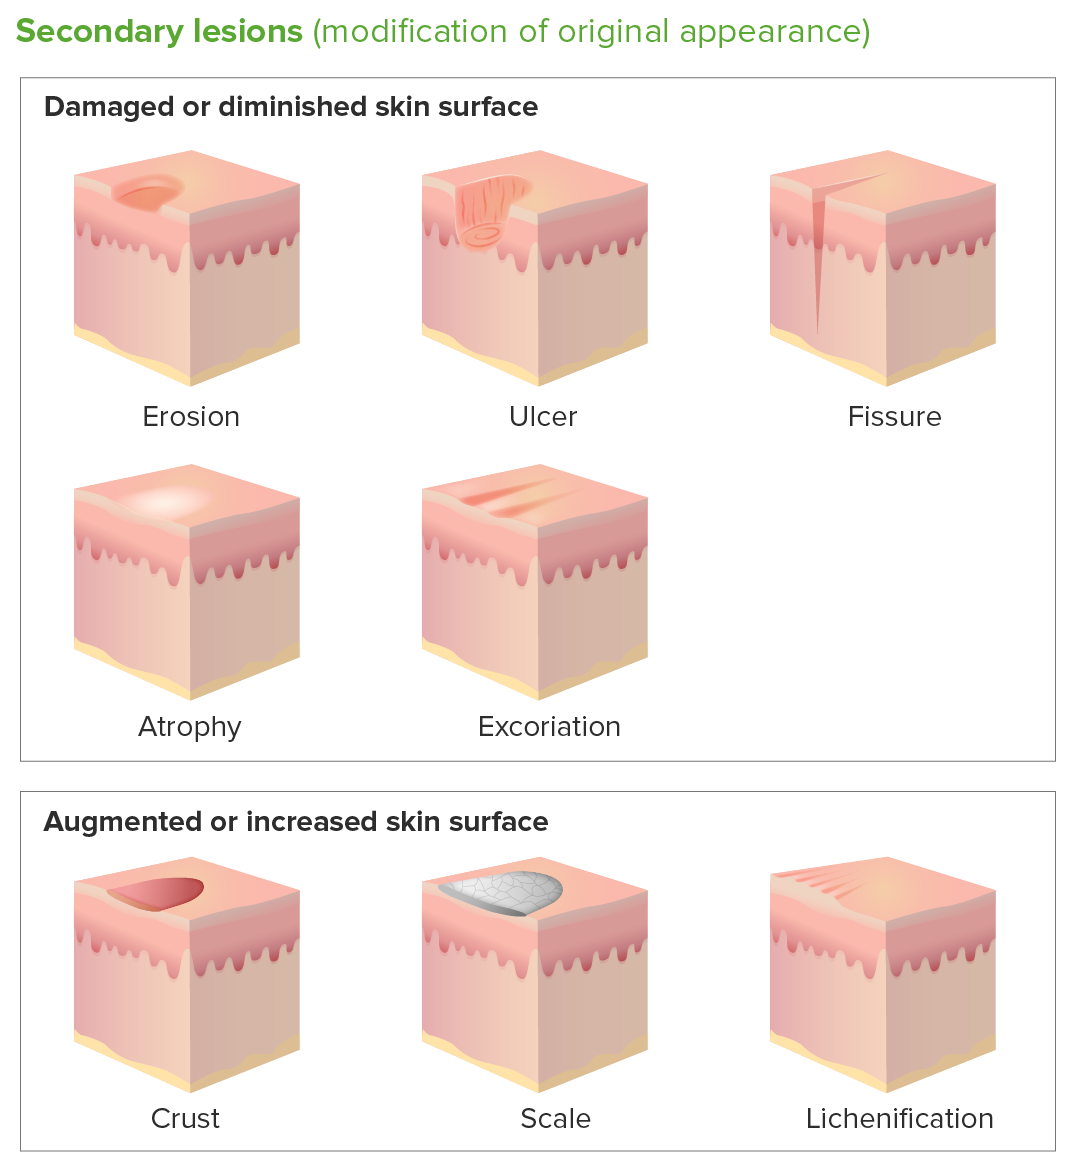 Secondary skin lesions